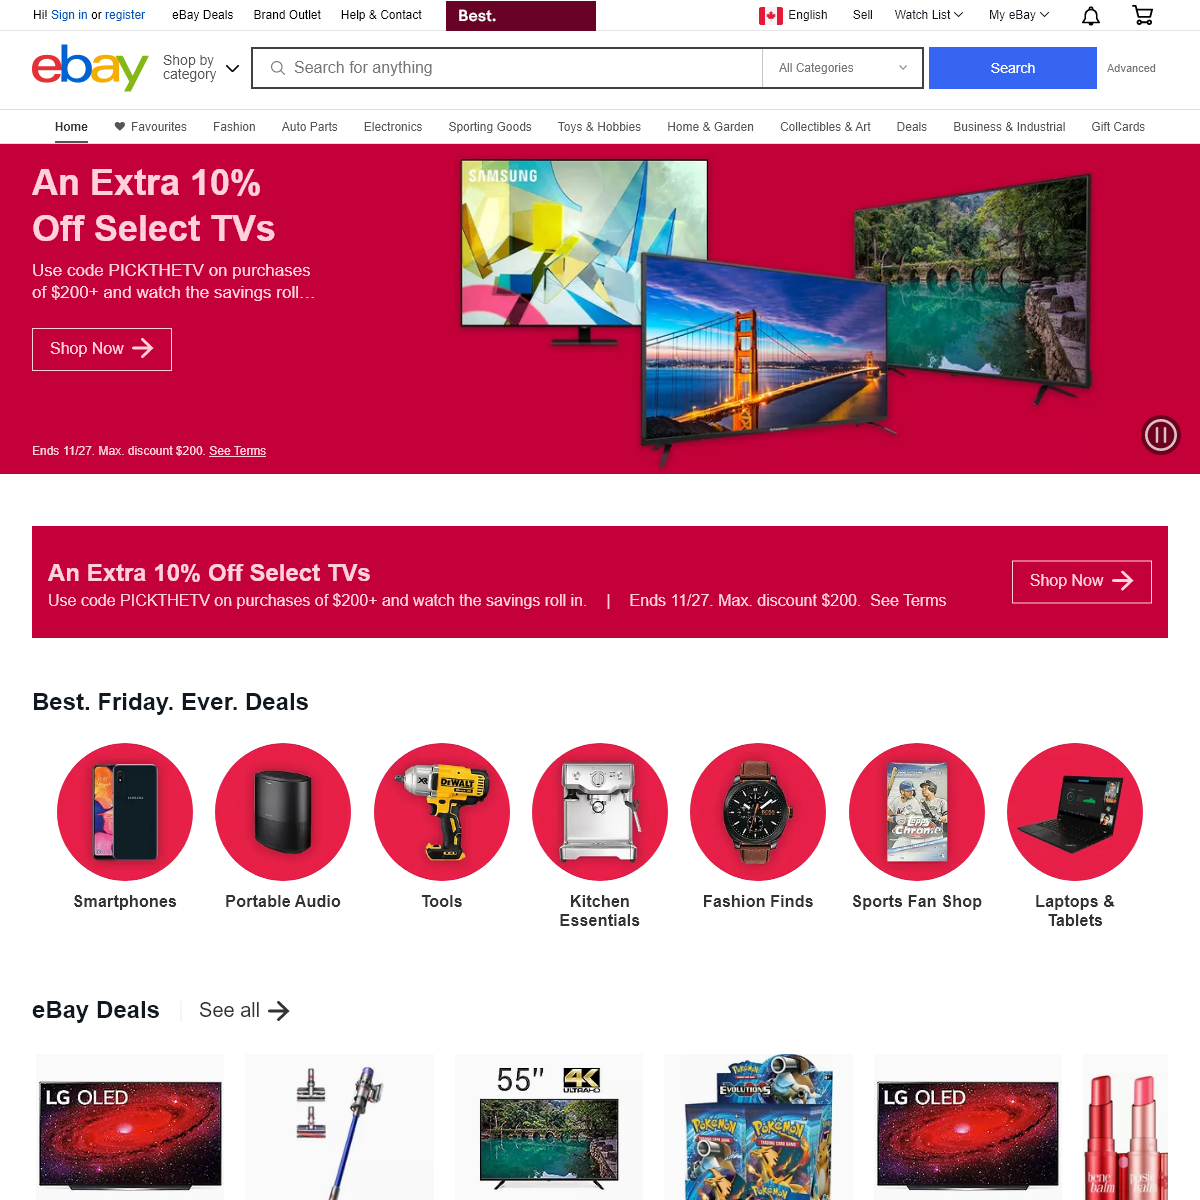 A complete backup of ebay.ca